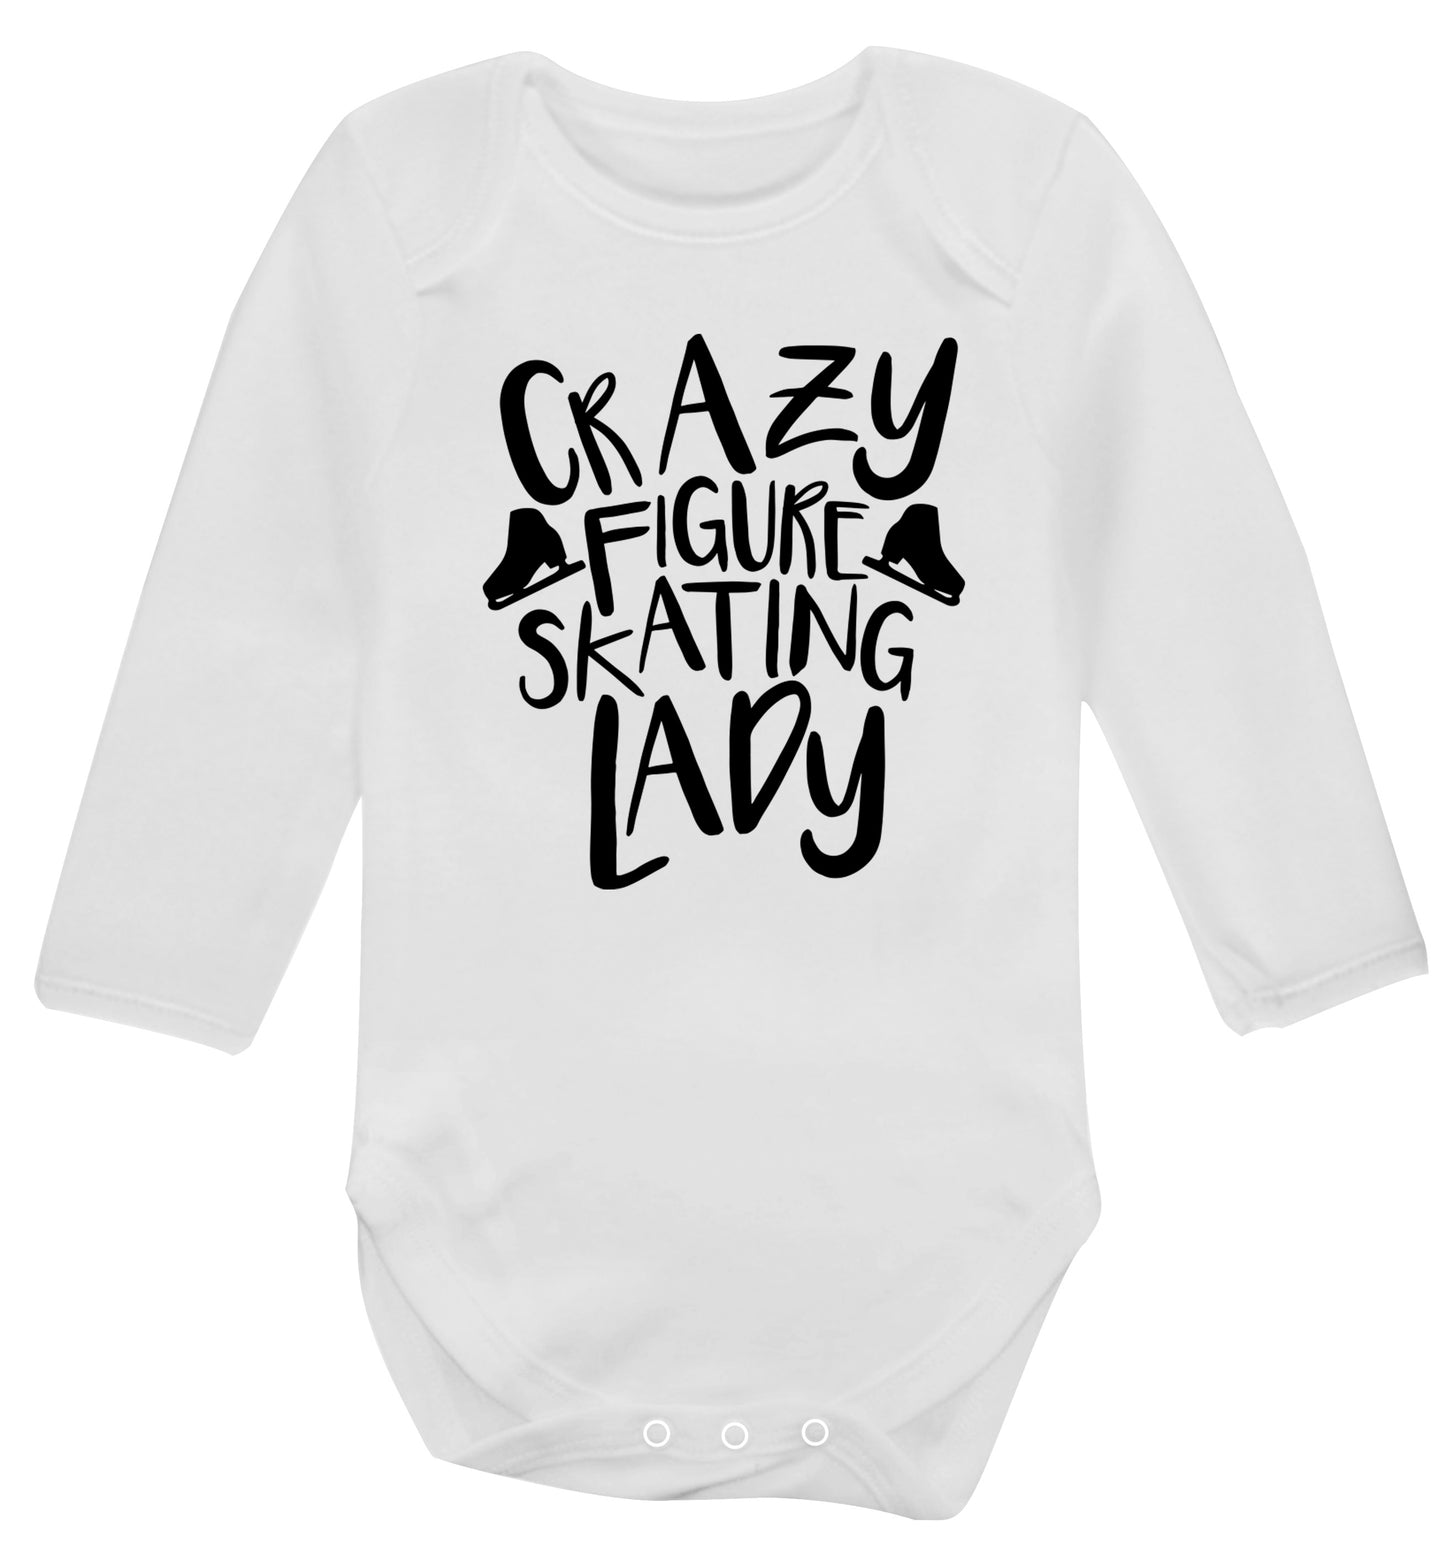 Crazy figure skating lady Baby Vest long sleeved white 6-12 months